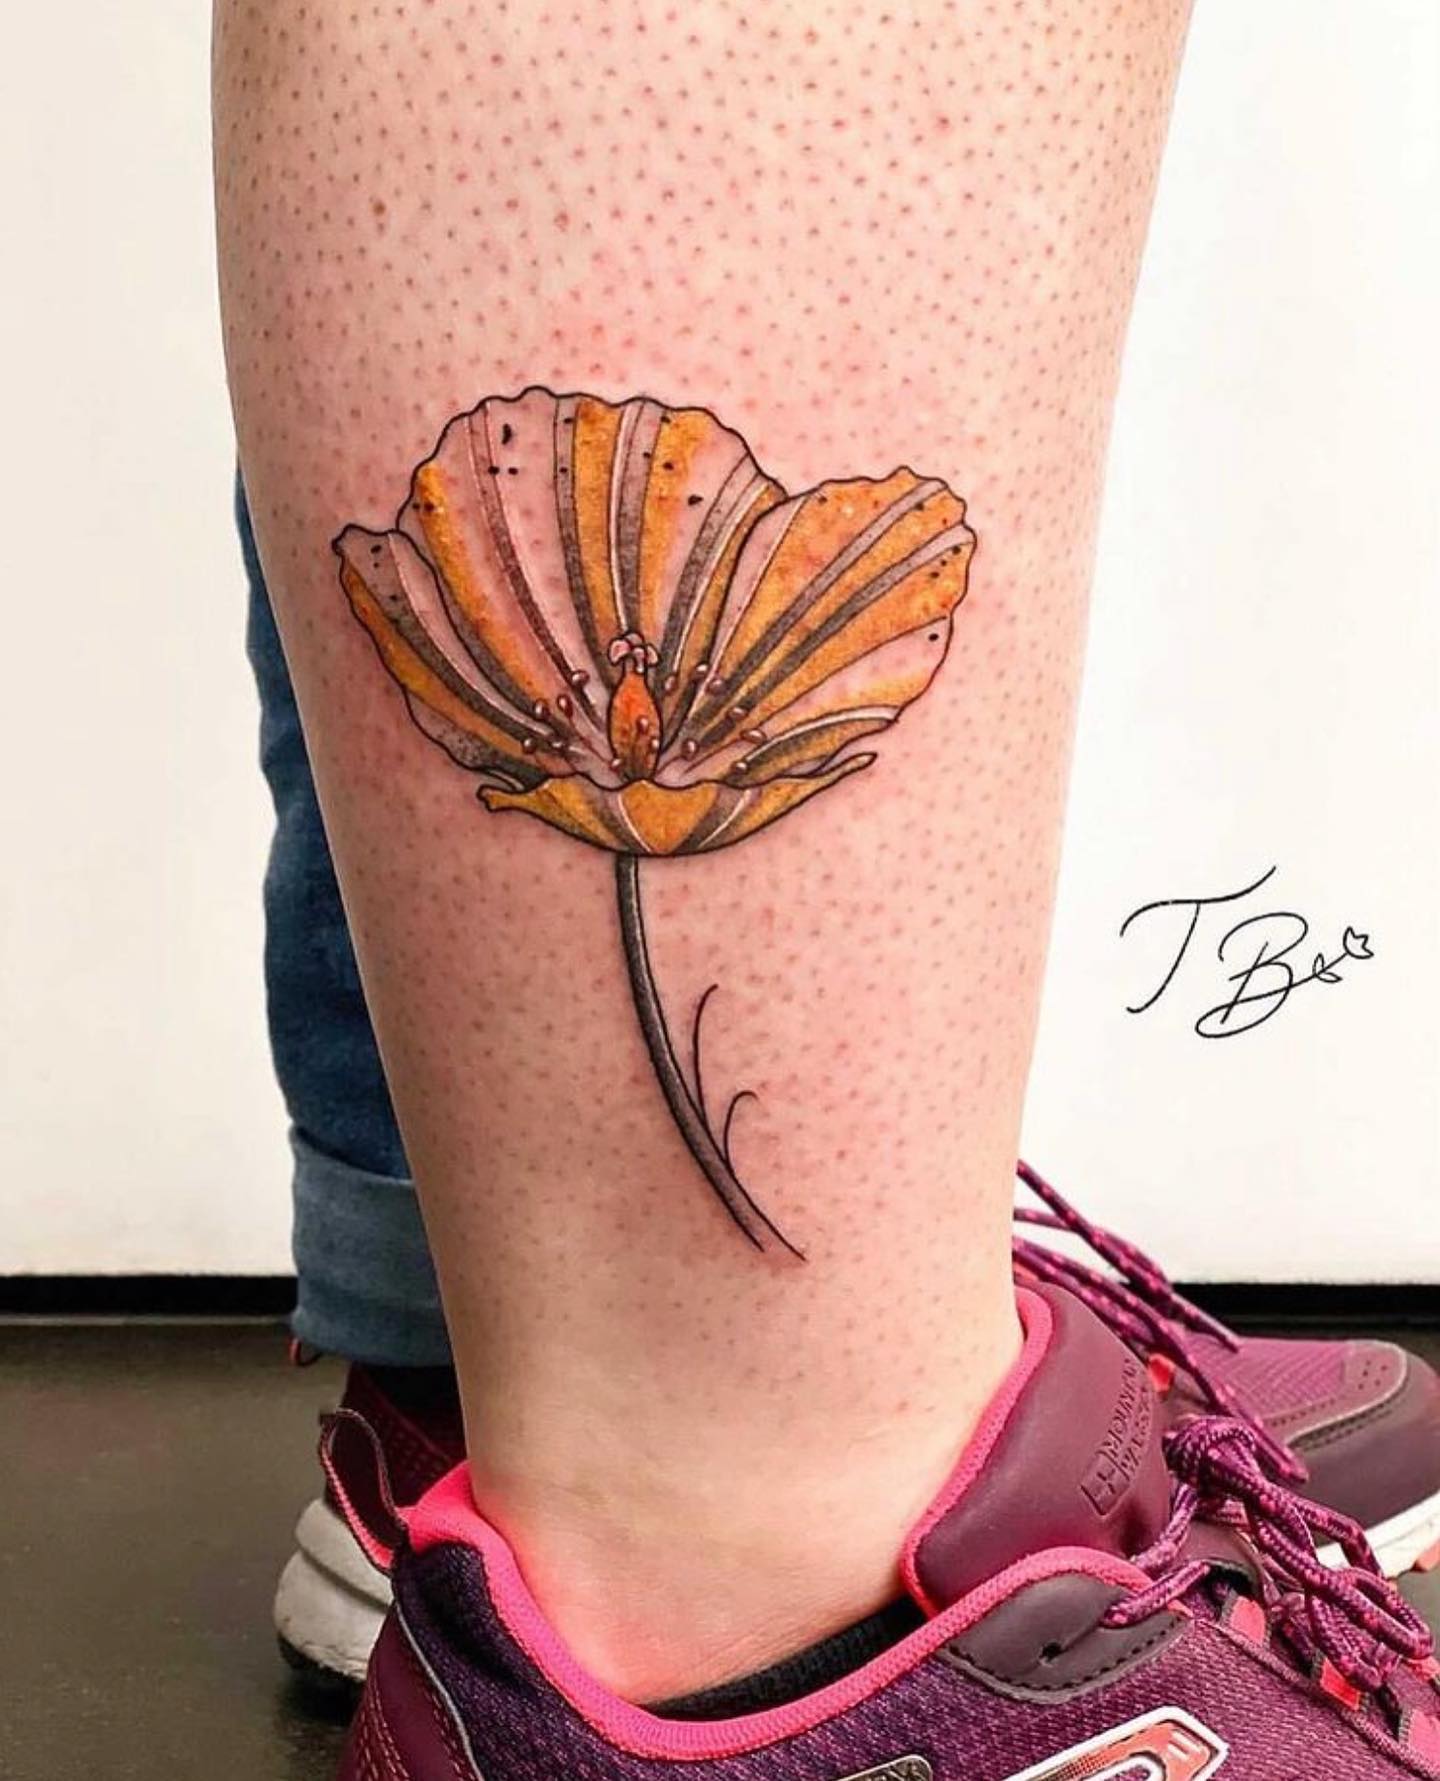 A lovely Welsh poppy from our fab resident thaisblanc 🌼
•
She has had a full day open up on Thursday (03/02/22) and a three hour session on Sunday (06/02/22). If you are interested in getting a quote, have received are quote already, or have a booking and would like these spaces instead, feel free to contact reception for more information 🌸
•
        